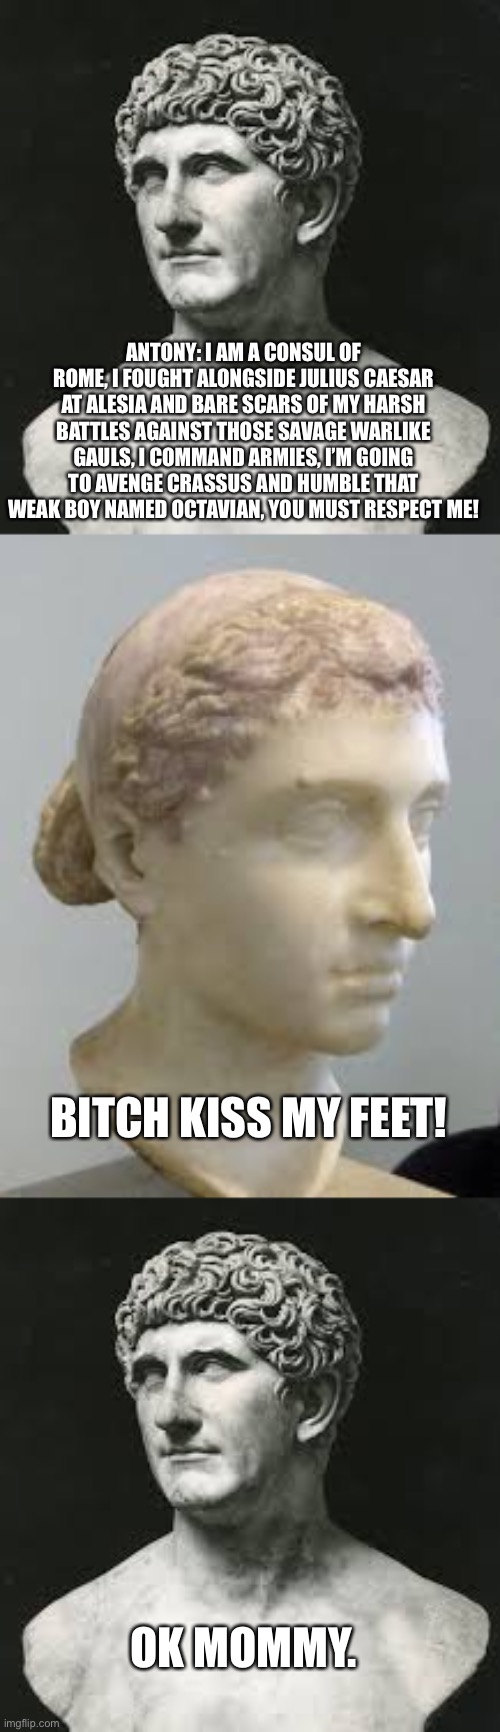 Antony and Cleopatra | ANTONY: I AM A CONSUL OF ROME, I FOUGHT ALONGSIDE JULIUS CAESAR AT ALESIA AND BARE SCARS OF MY HARSH BATTLES AGAINST THOSE SAVAGE WARLIKE GAULS, I COMMAND ARMIES, I’M GOING TO AVENGE CRASSUS AND HUMBLE THAT WEAK BOY NAMED OCTAVIAN, YOU MUST RESPECT ME! BITCH KISS MY FEET! OK MOMMY. | image tagged in funny memes | made w/ Imgflip meme maker